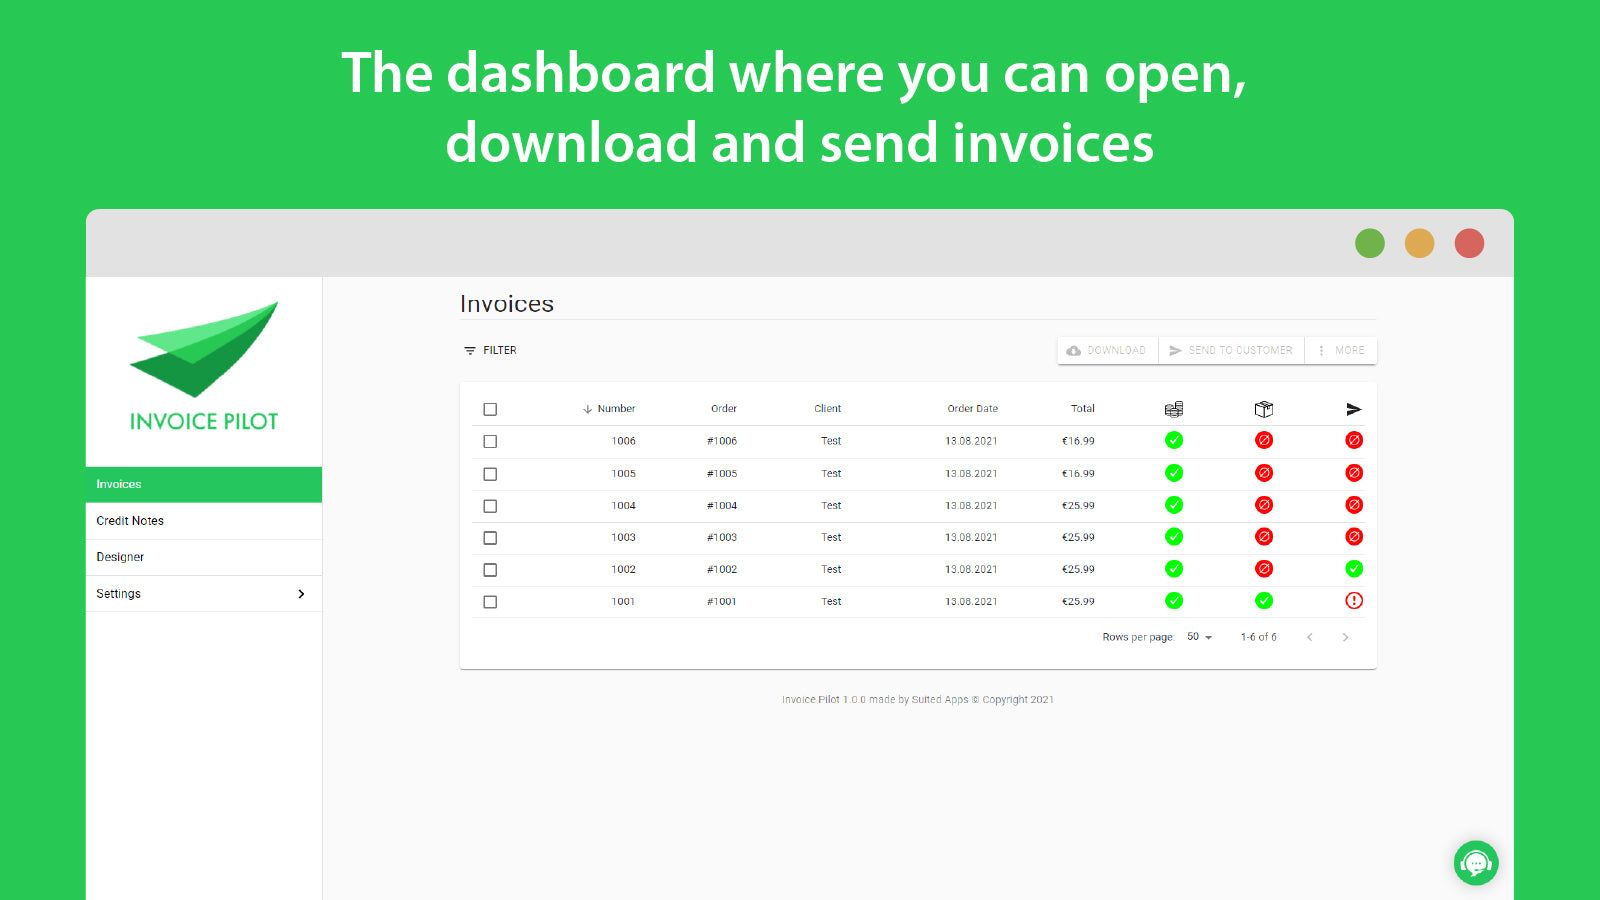 The dashboard where you can open, download and send invoices